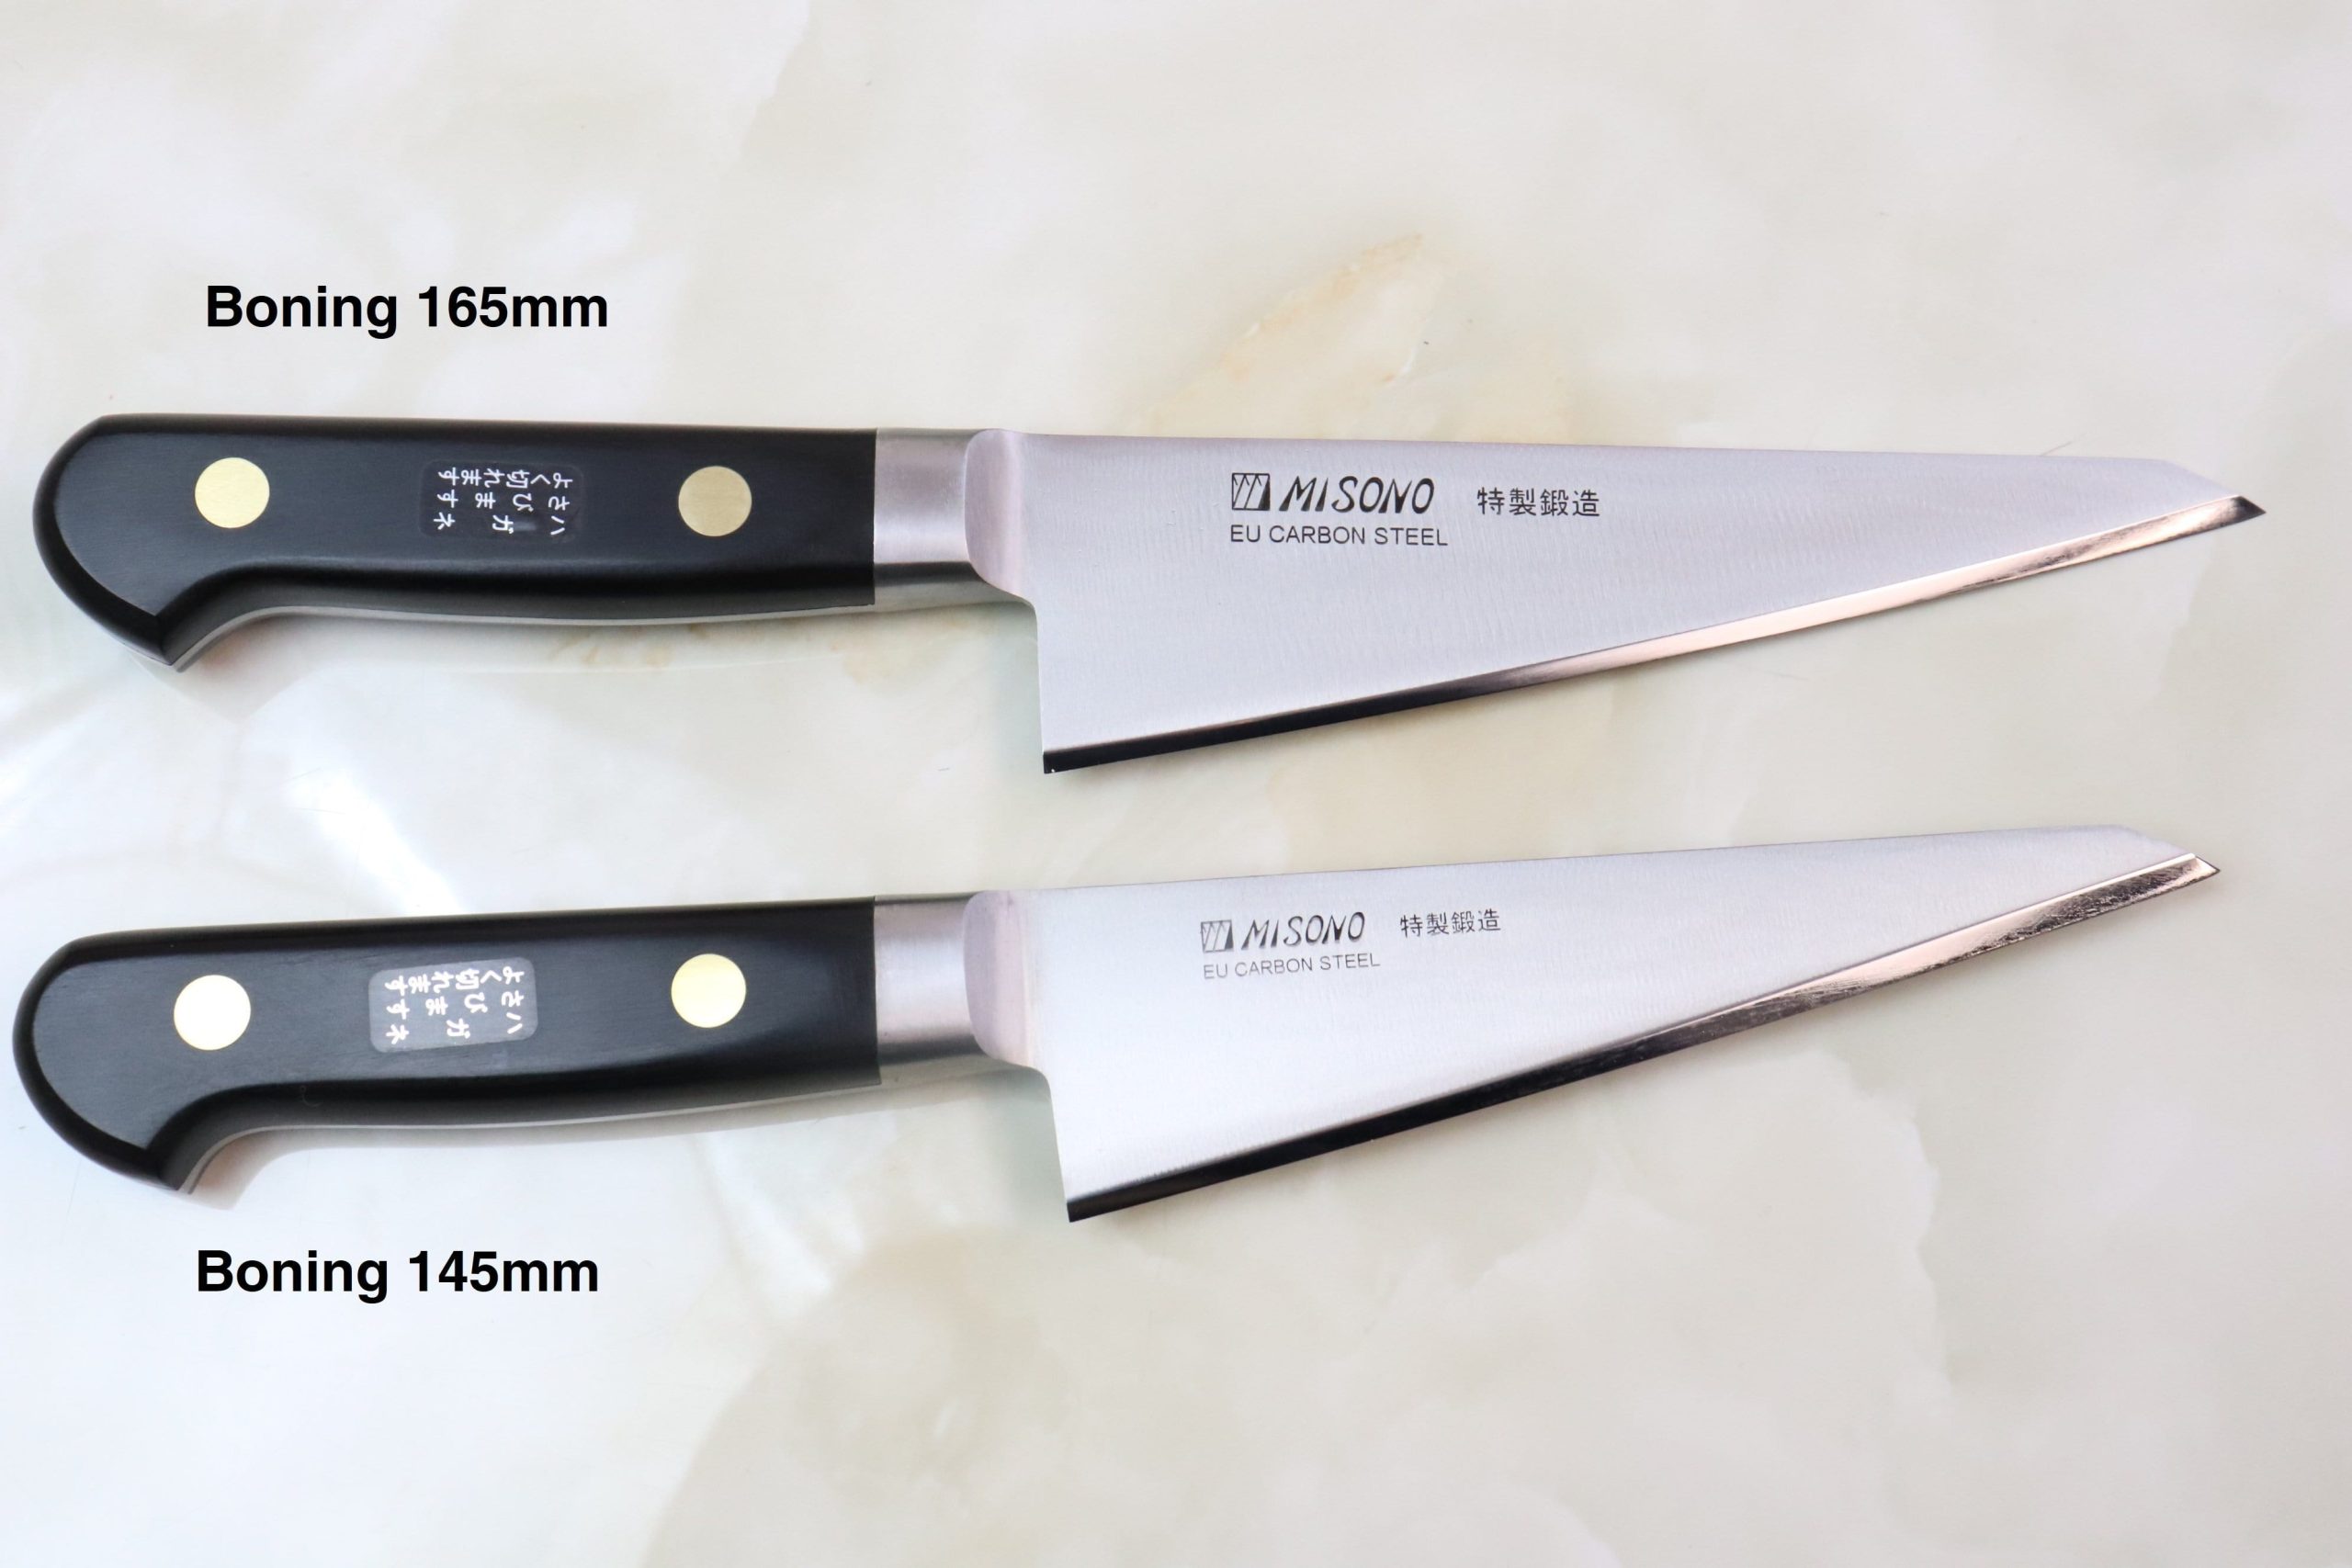 The Different Types of Boning Knives and Their Uses